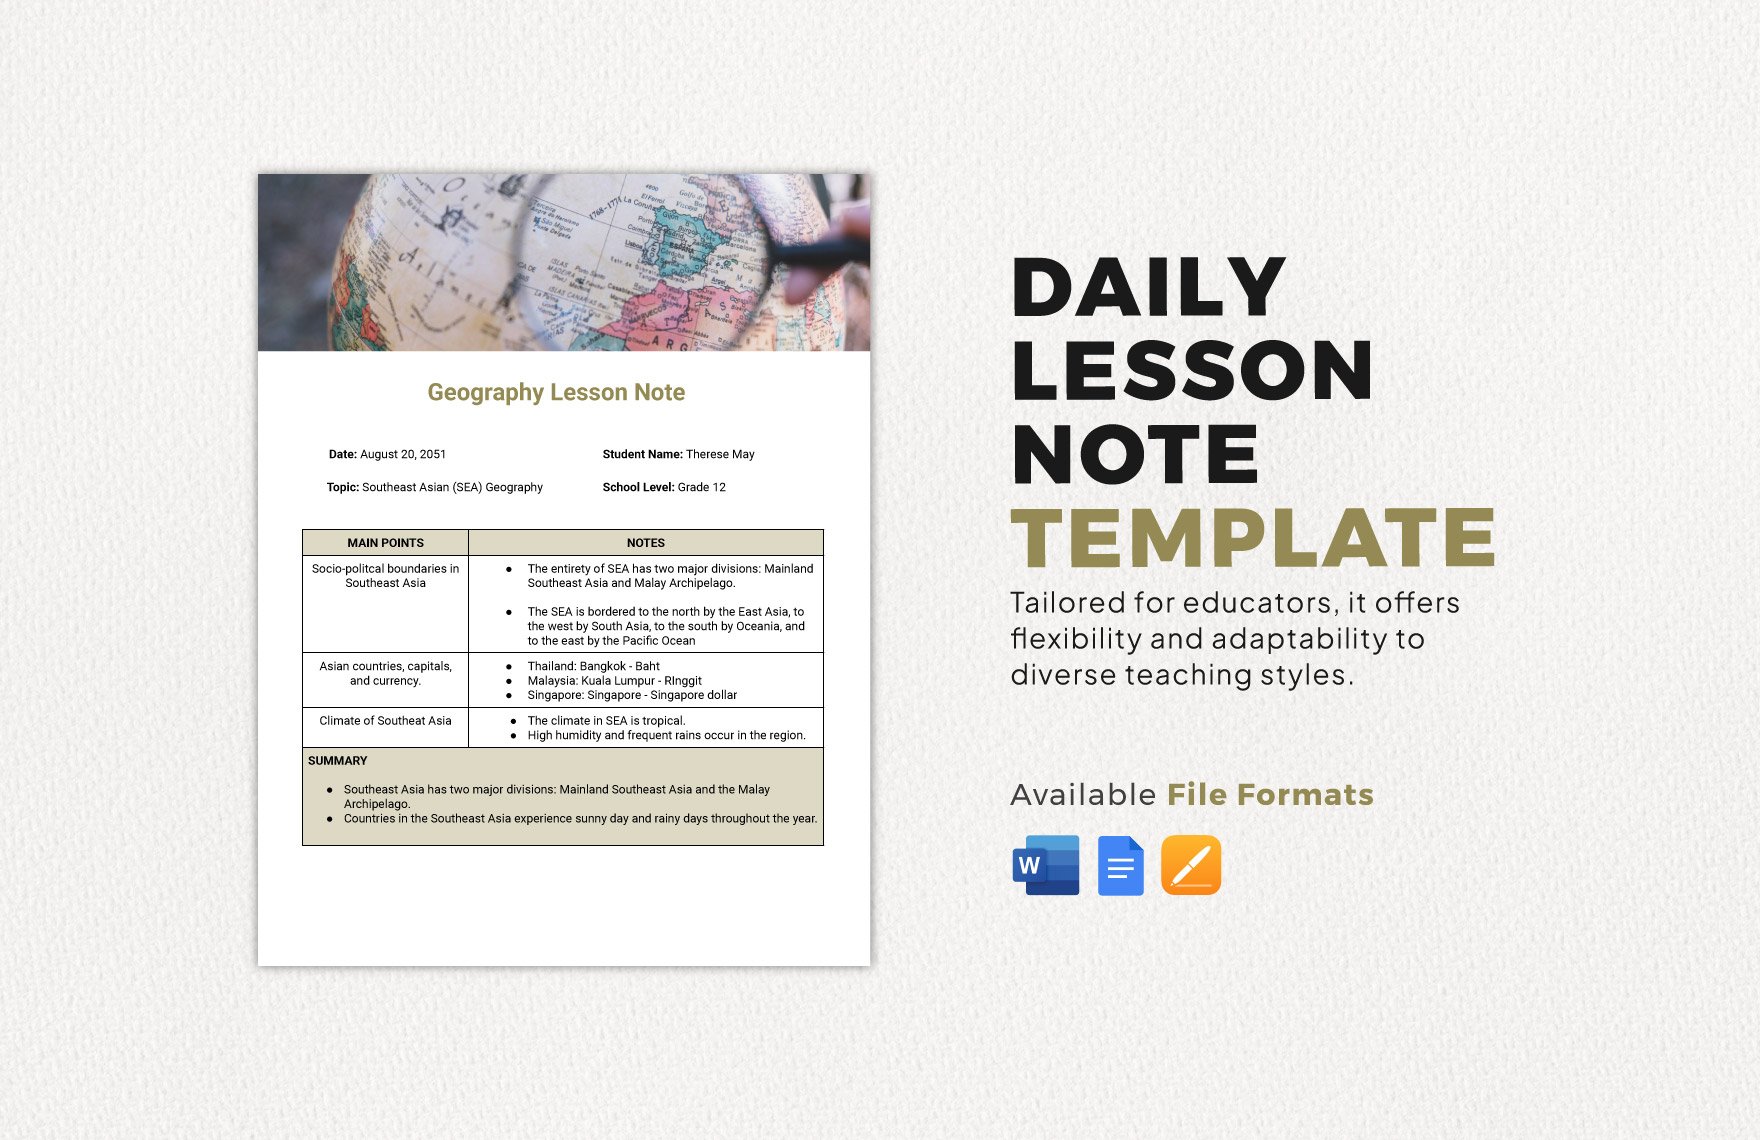 Daily Lesson Note Template